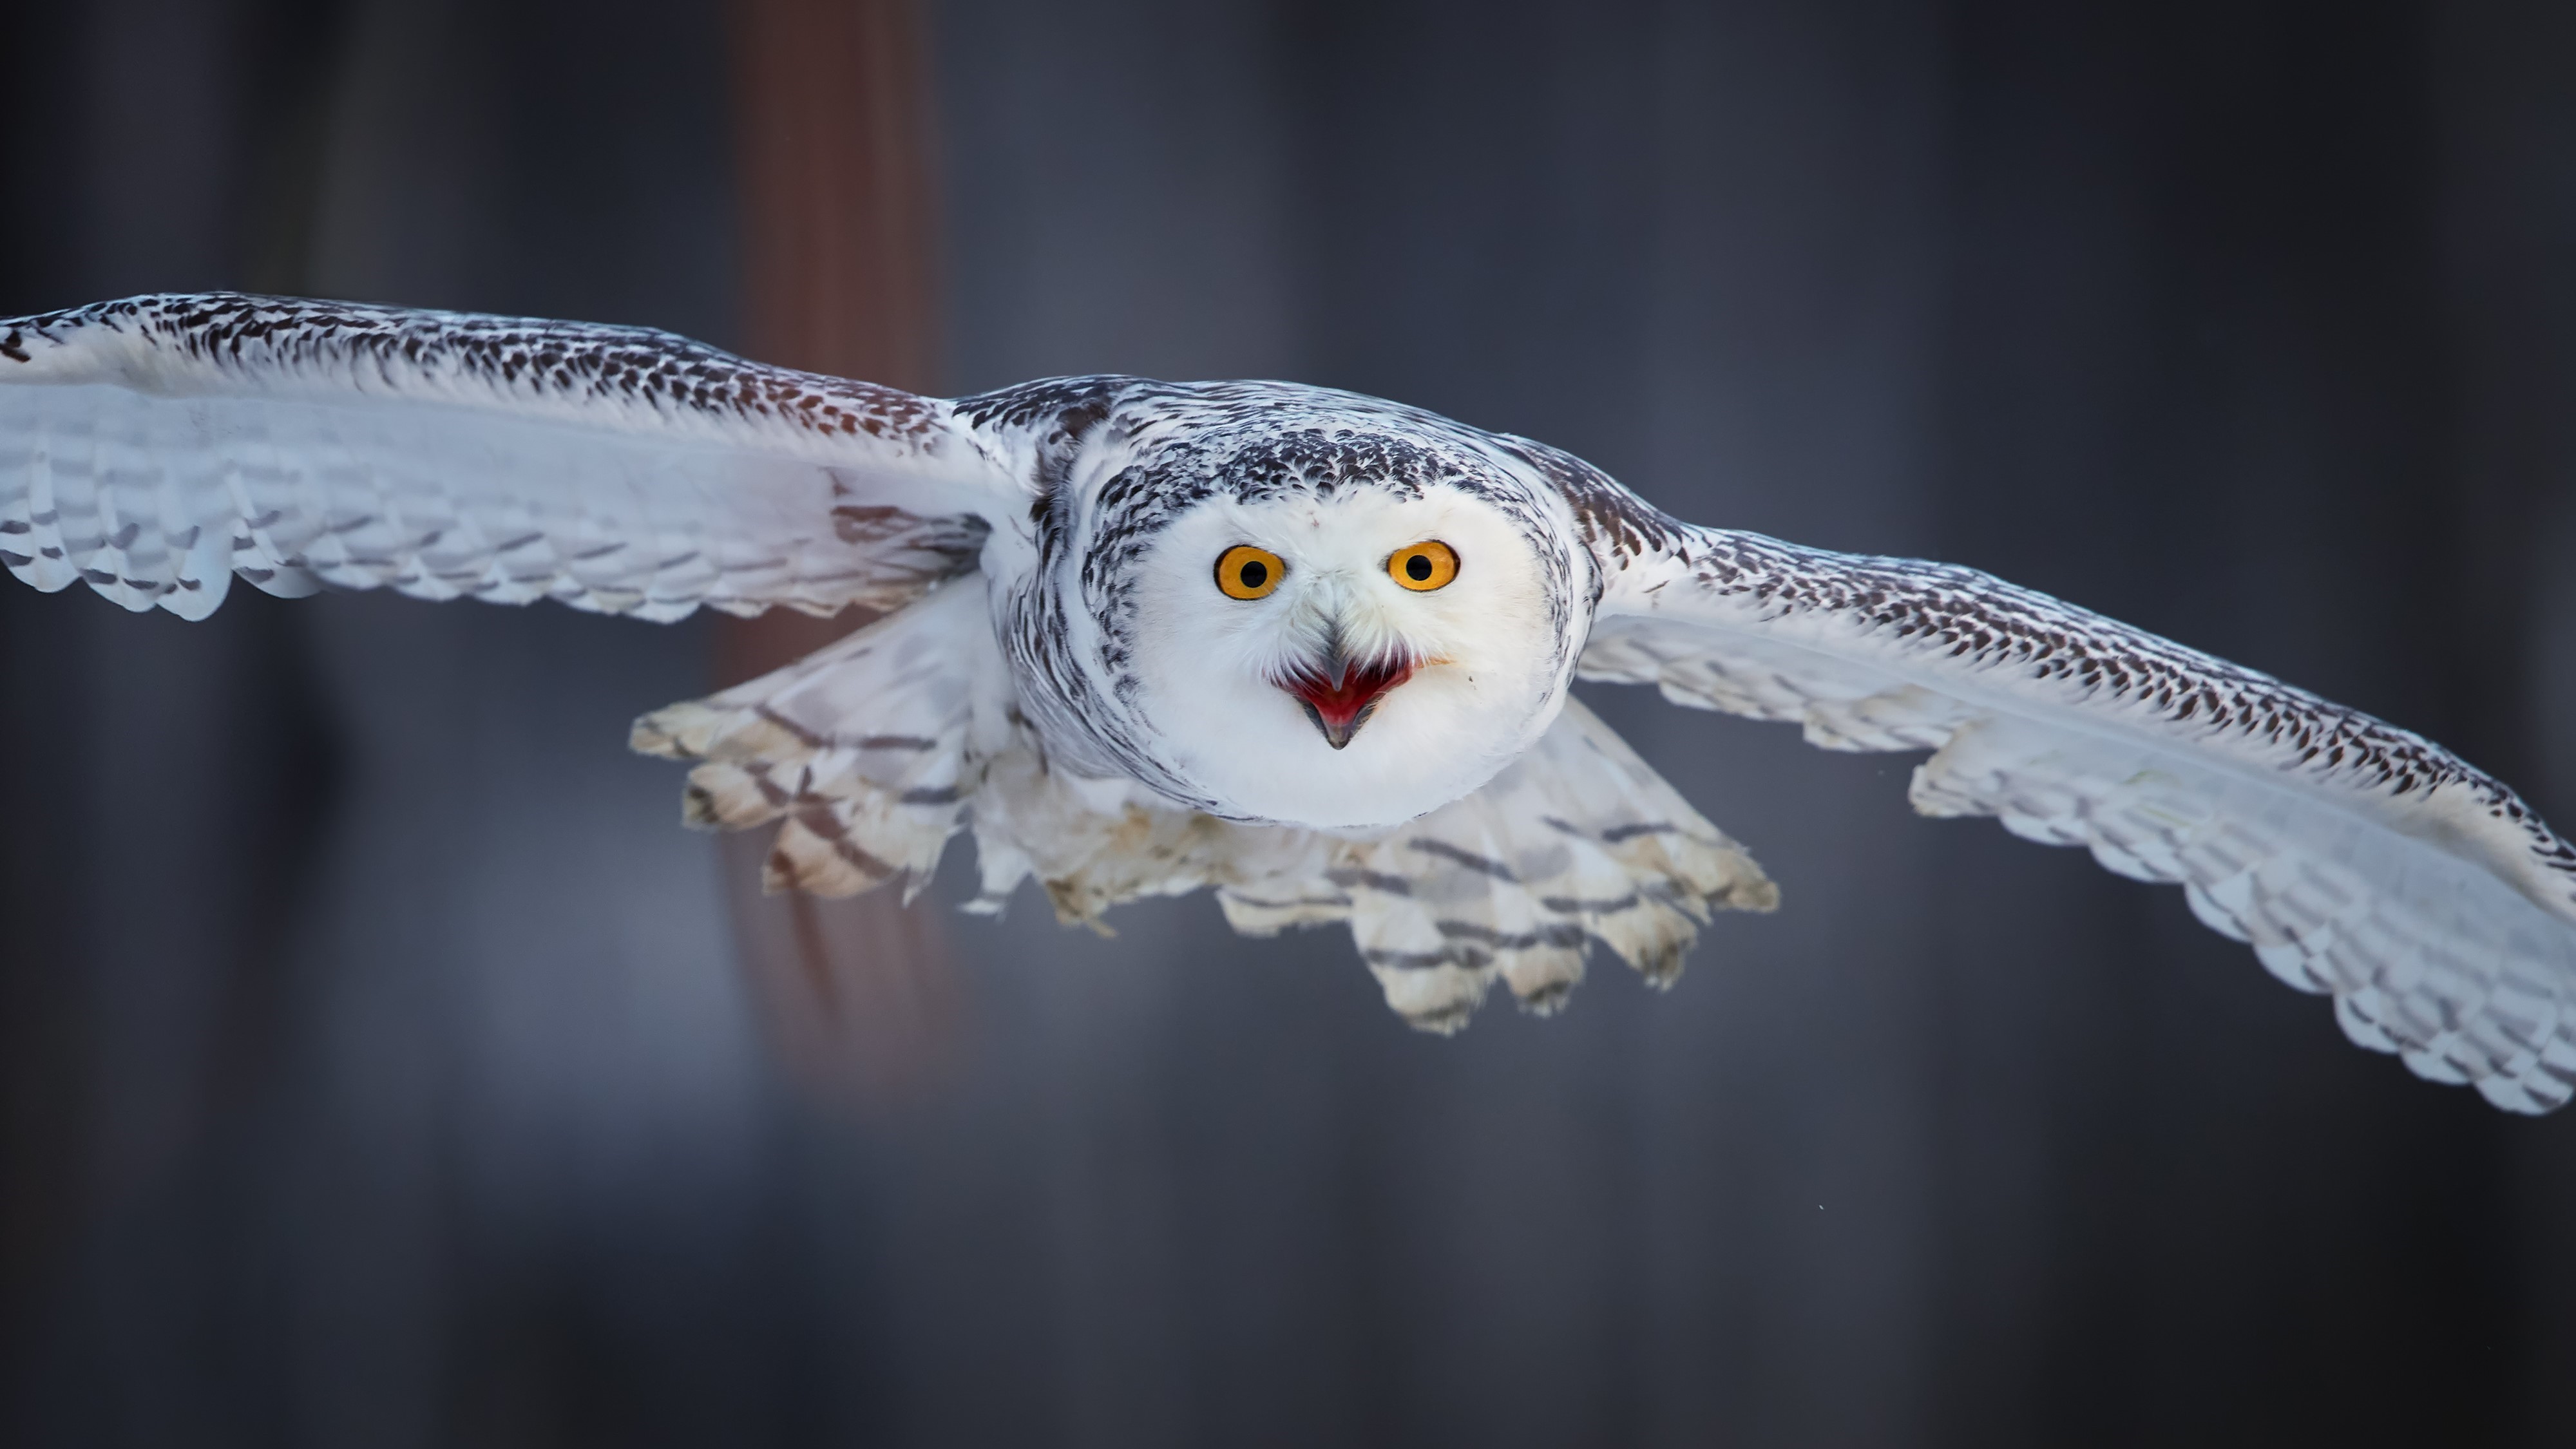 A snowy owl in flight looking at the camera.